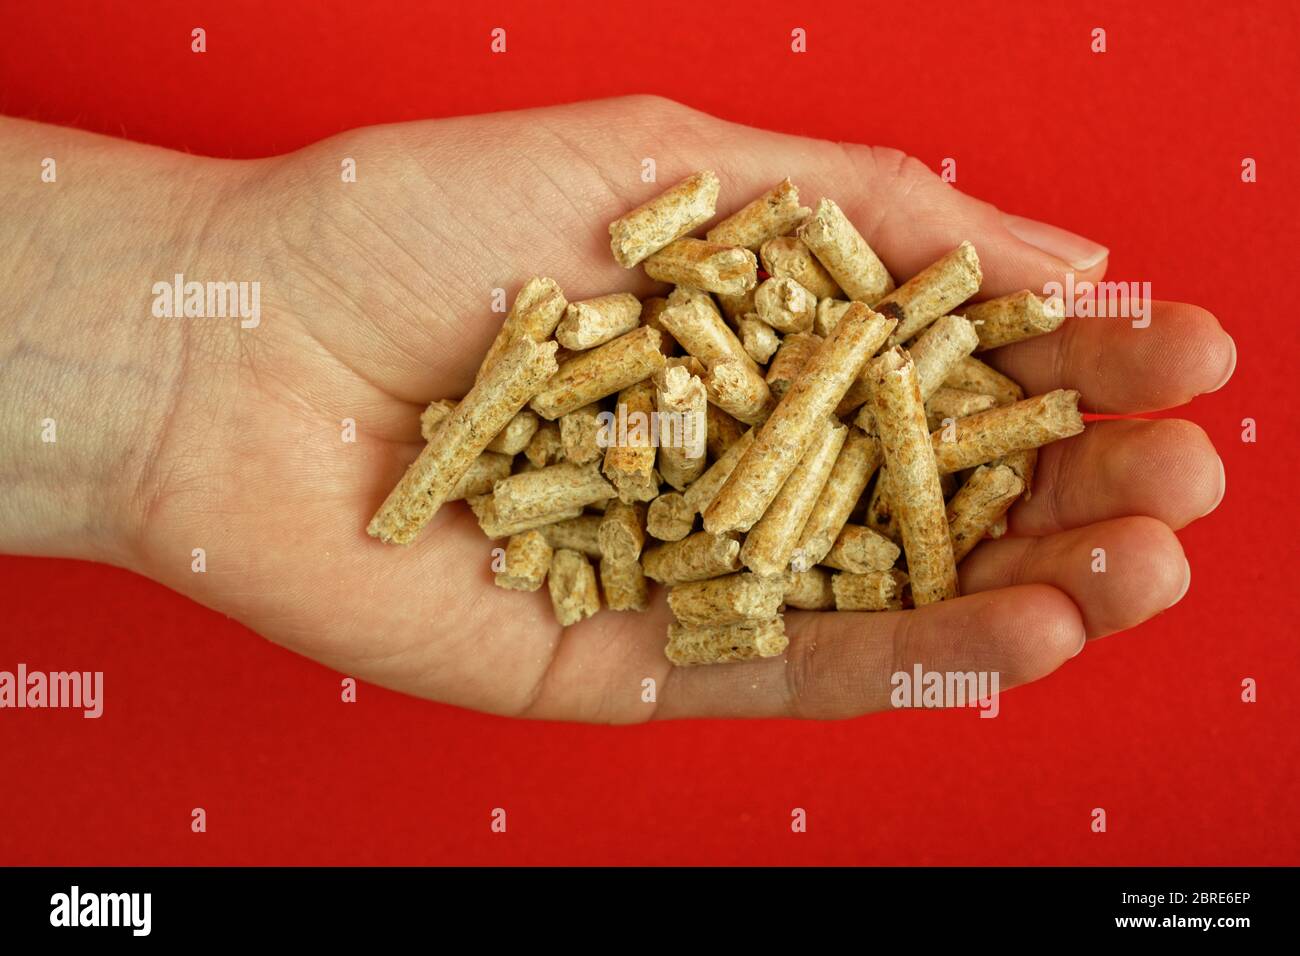 Wood-Pellets for heating purposes in the palm of a hand Stock Photo